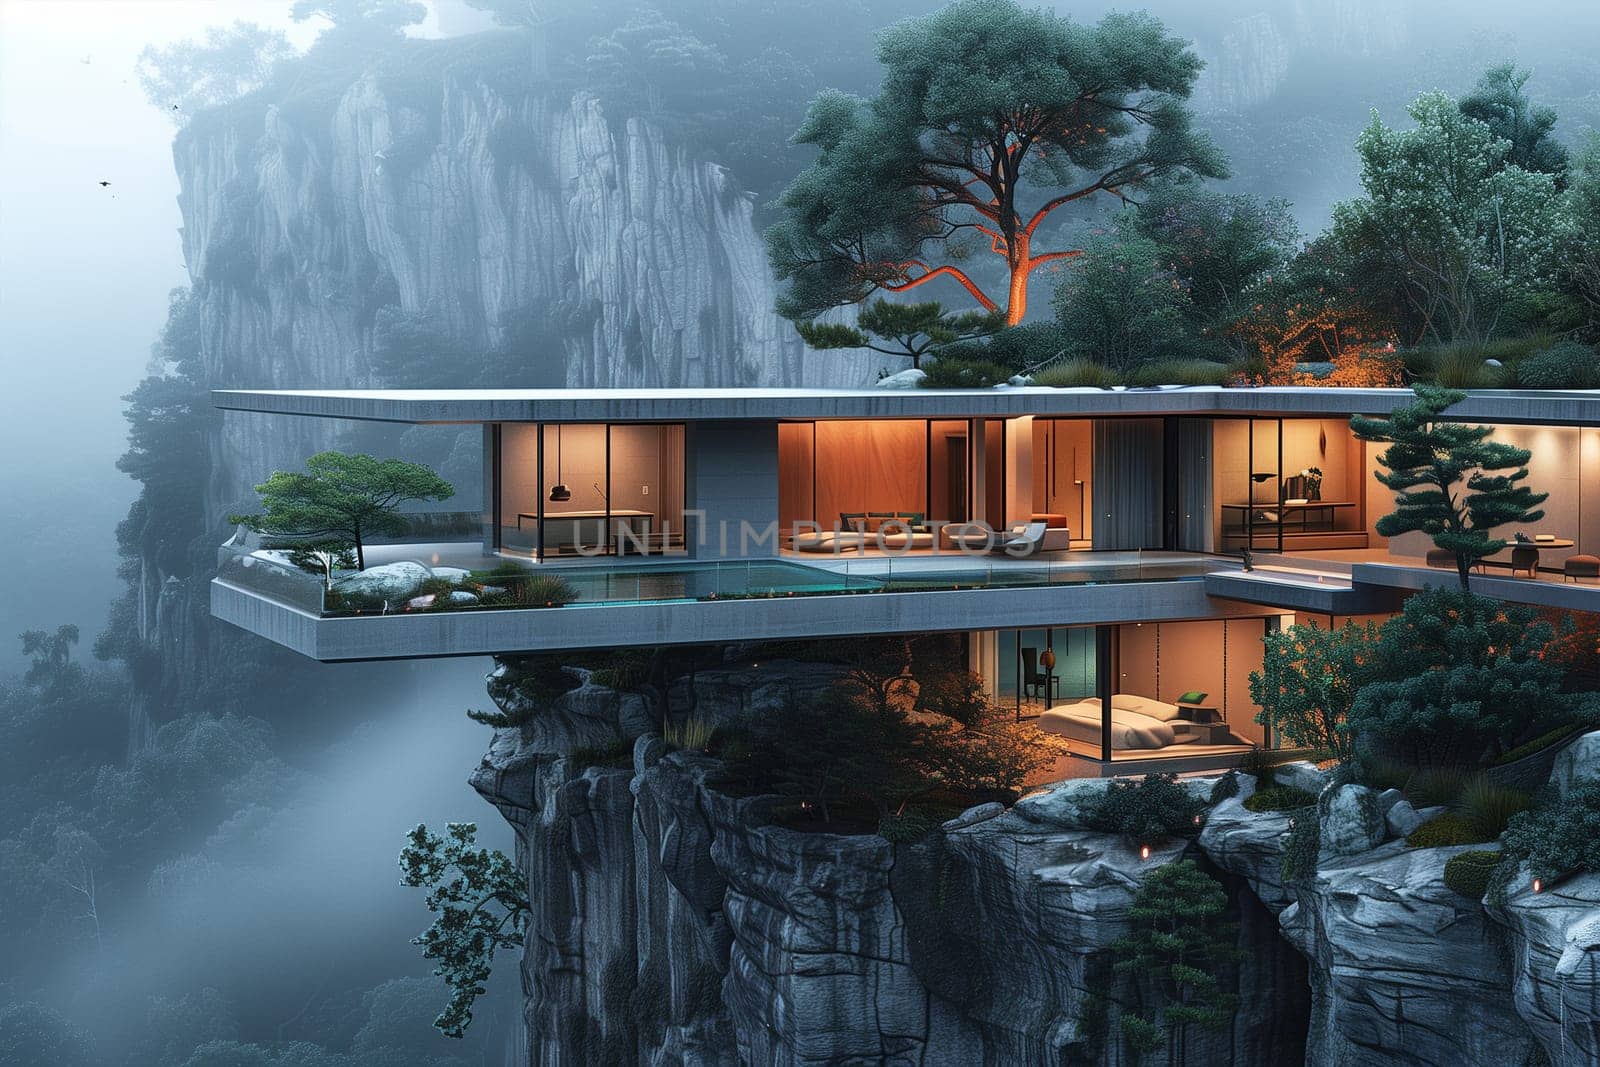 A house precariously positioned on the edge of a cliff, overlooking the vast expanse below.